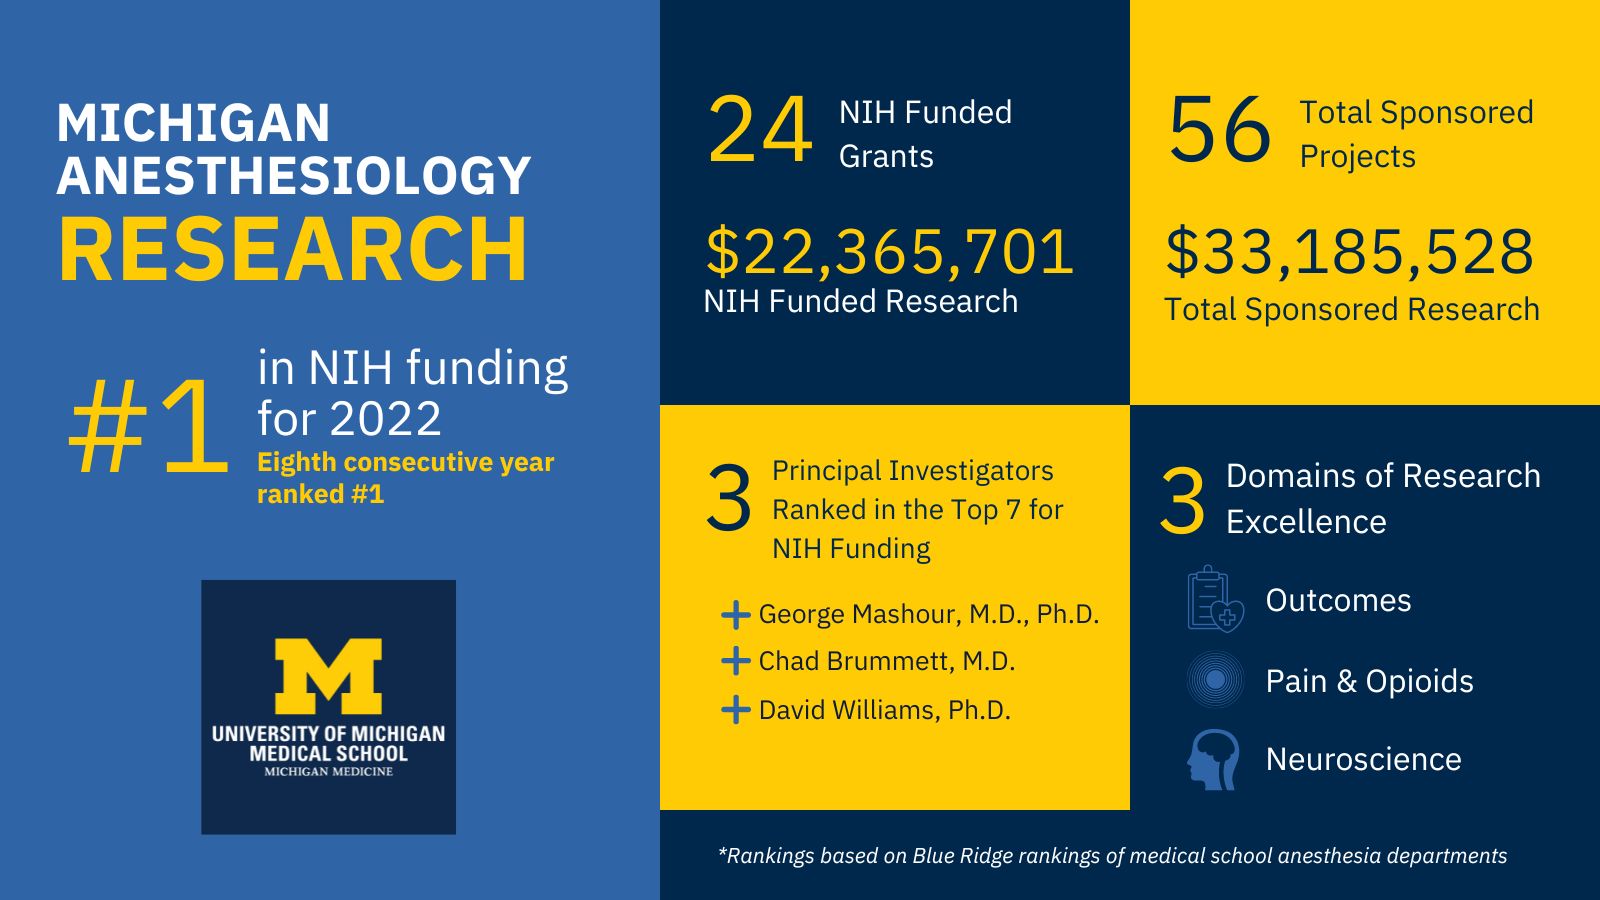 Michigan Anesthesiology Ranked #1 in NIH Research Funding - 24 NIH Funded Grants - $22.4M in Funding